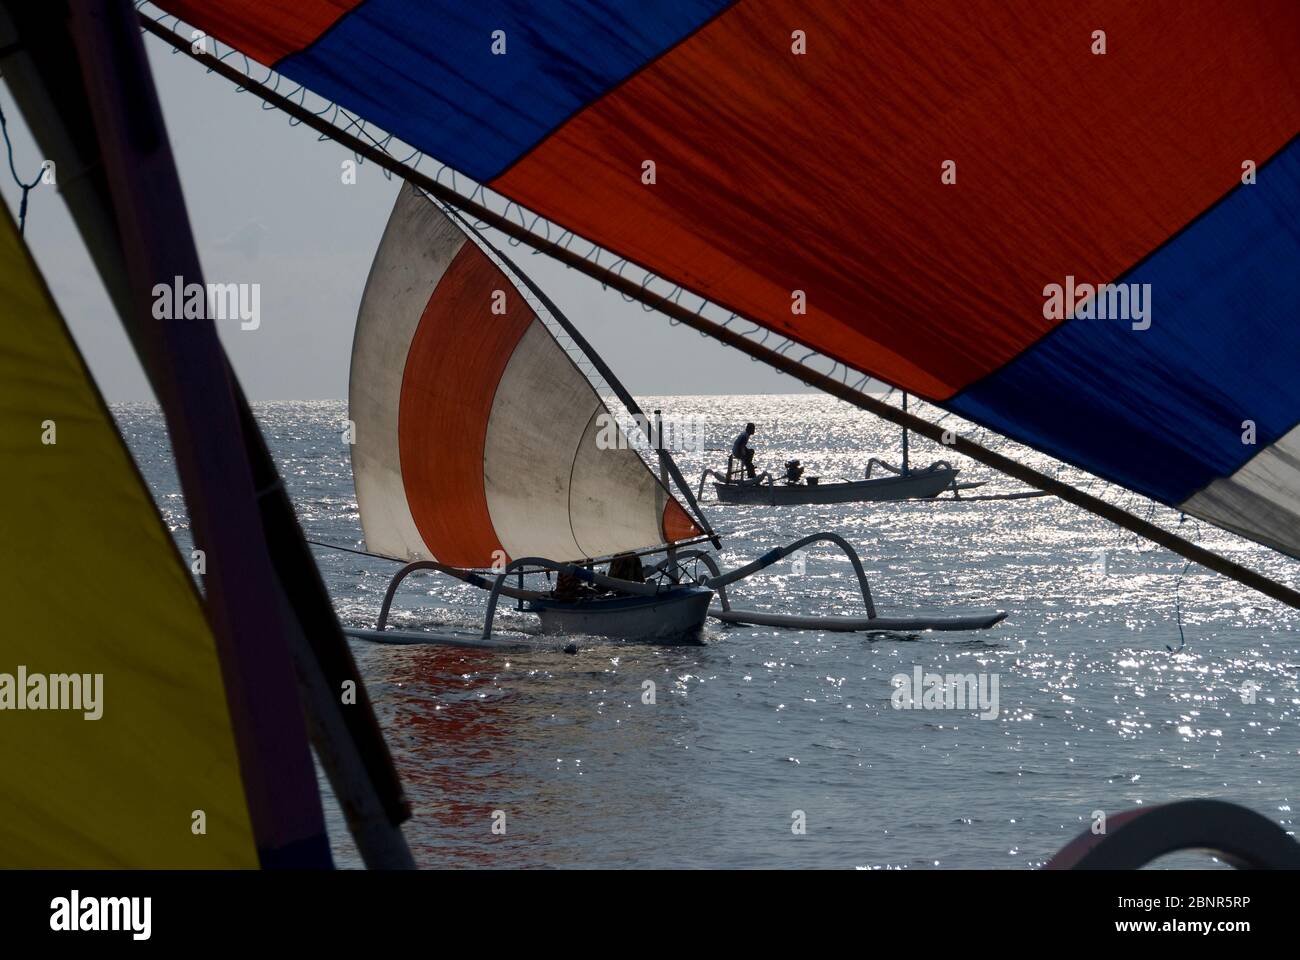 Outrigger canoe on water with colorful sails during Jukung Race, Tulamben, Bali, Indonesia Stock Photo